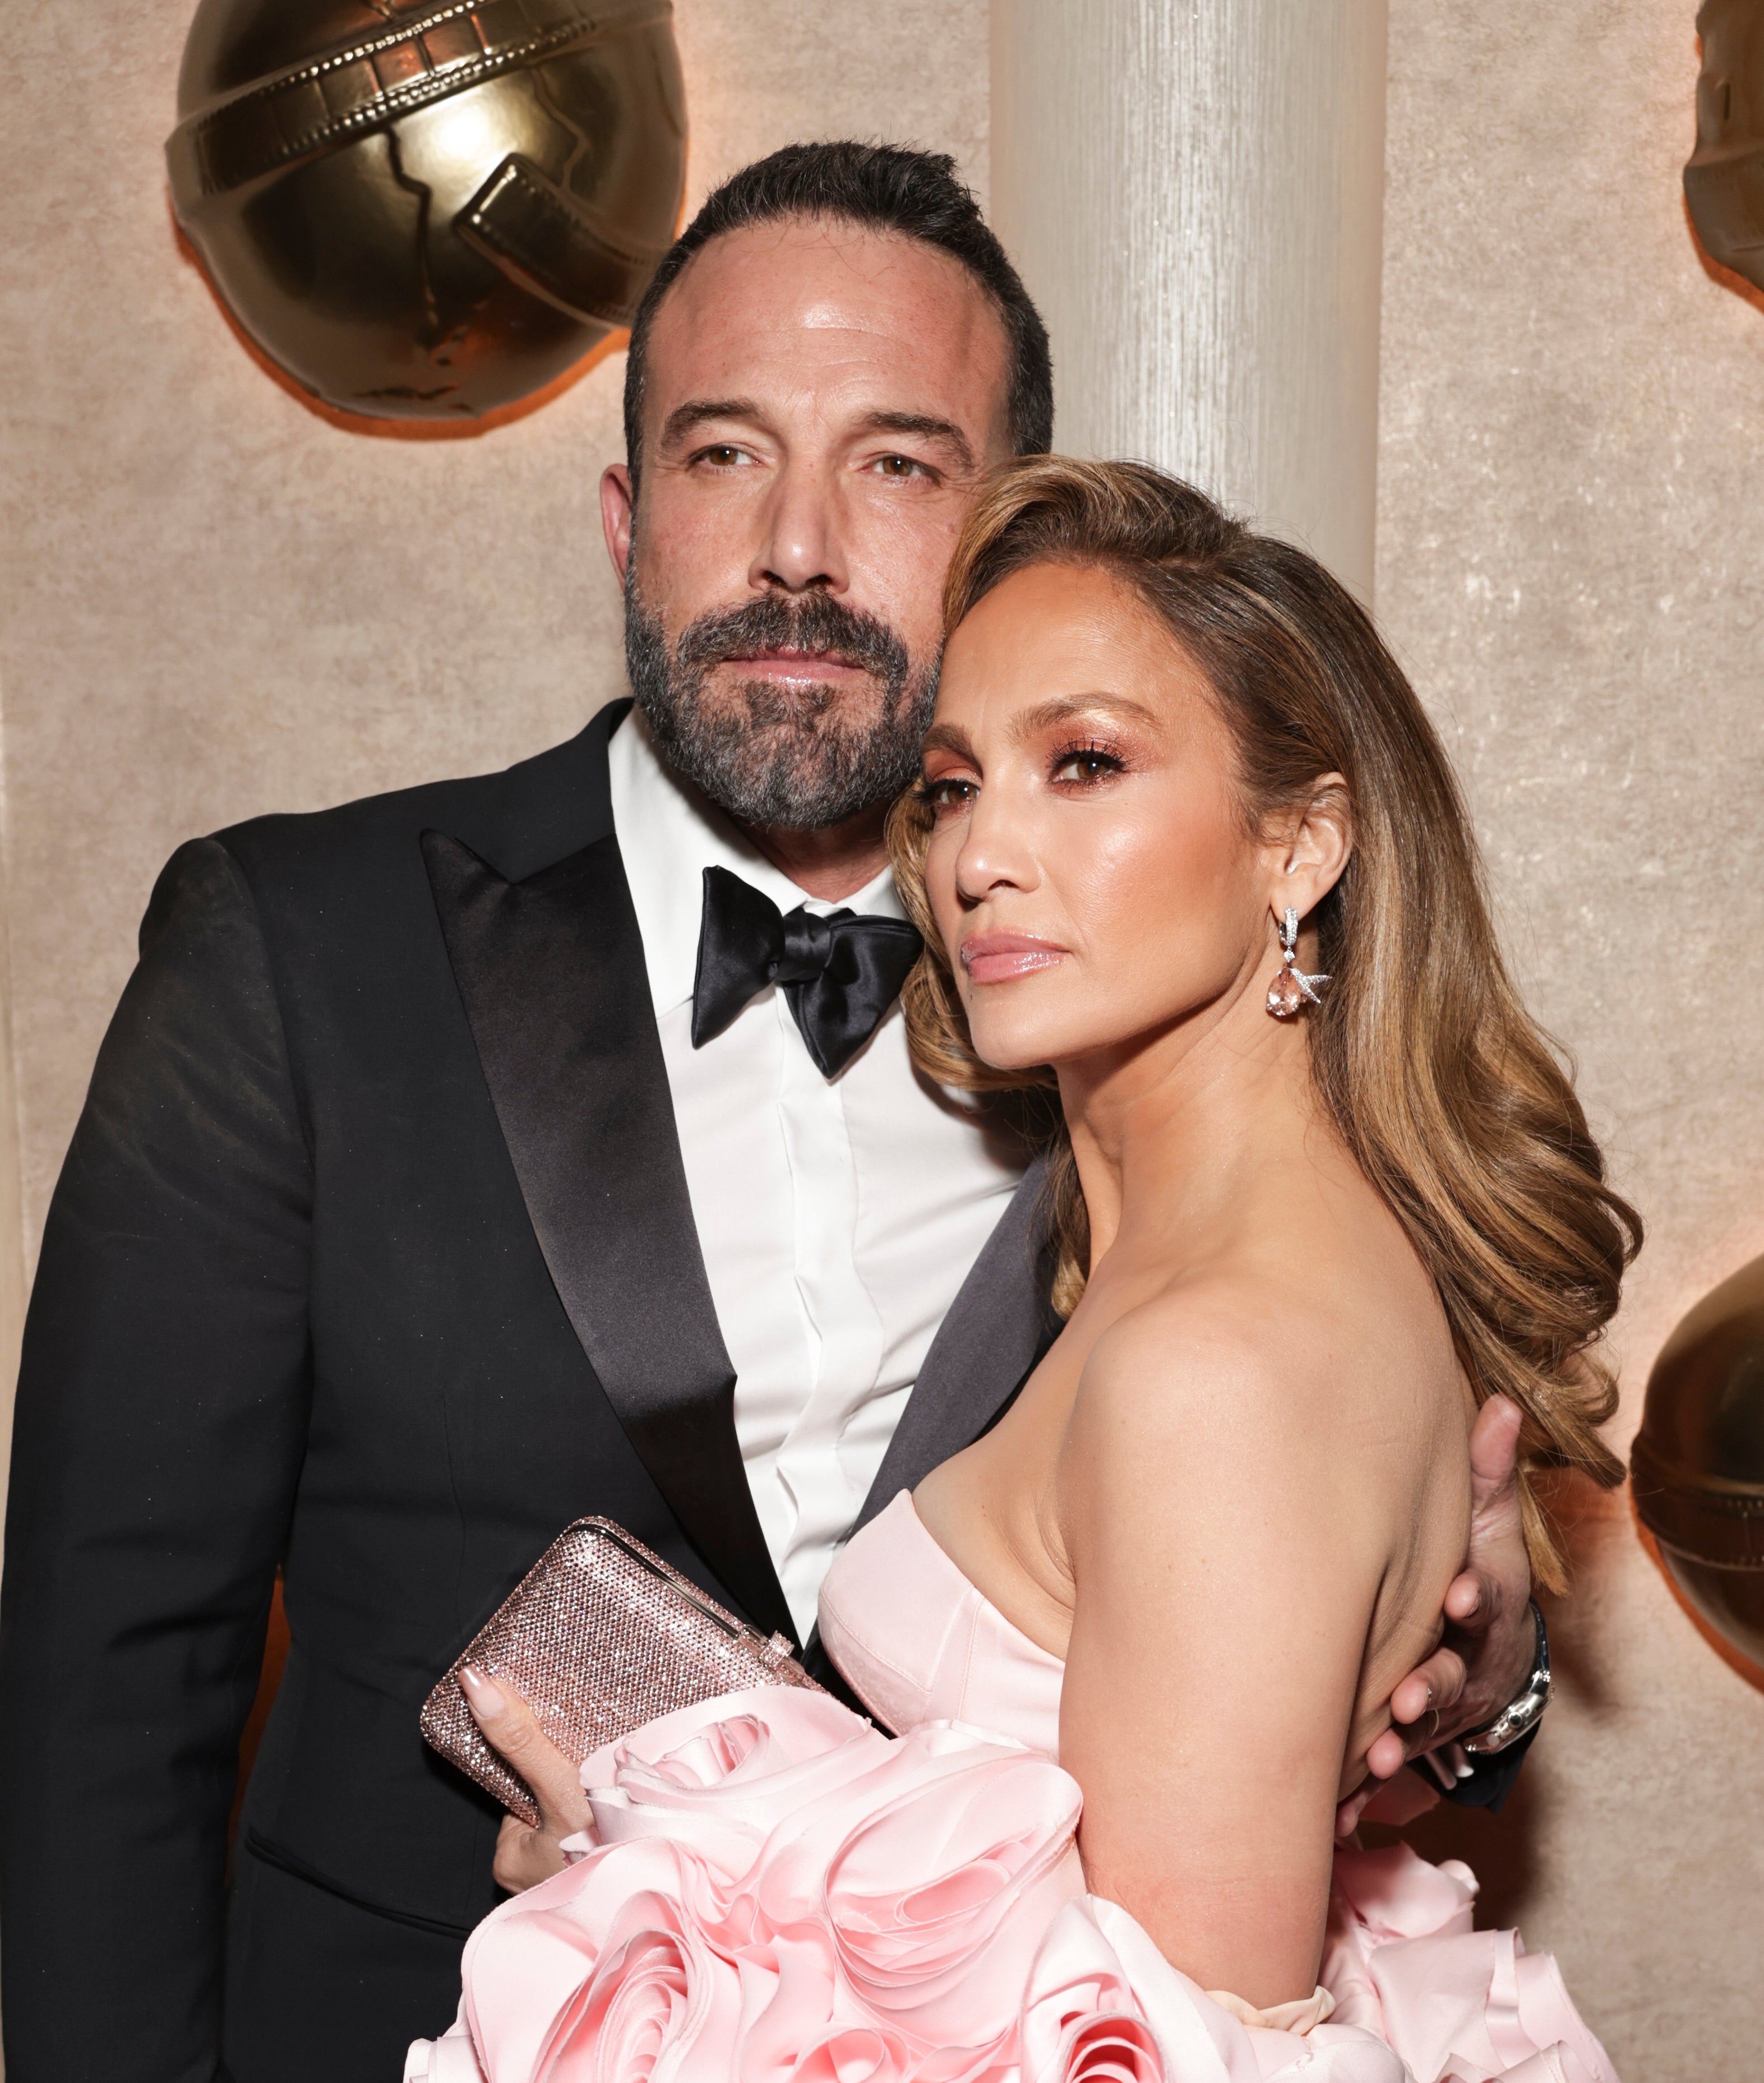 Jennifer Lopez in a gown with floral embellishments poses with Ben Affleck in a tuxedo